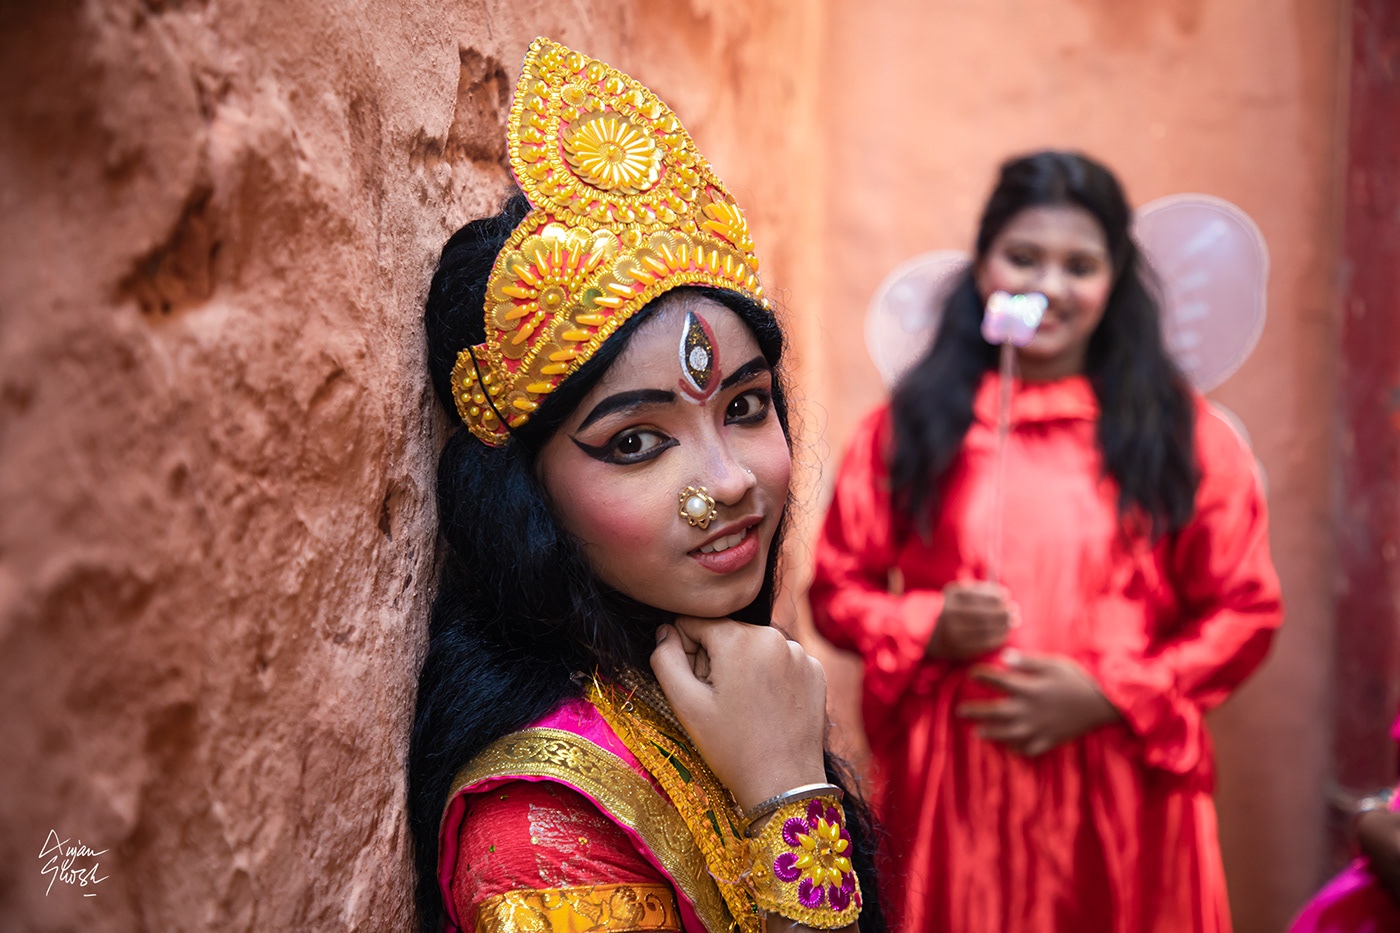 person Photography  portrait photoshoot photographer beauty festival India people street photography